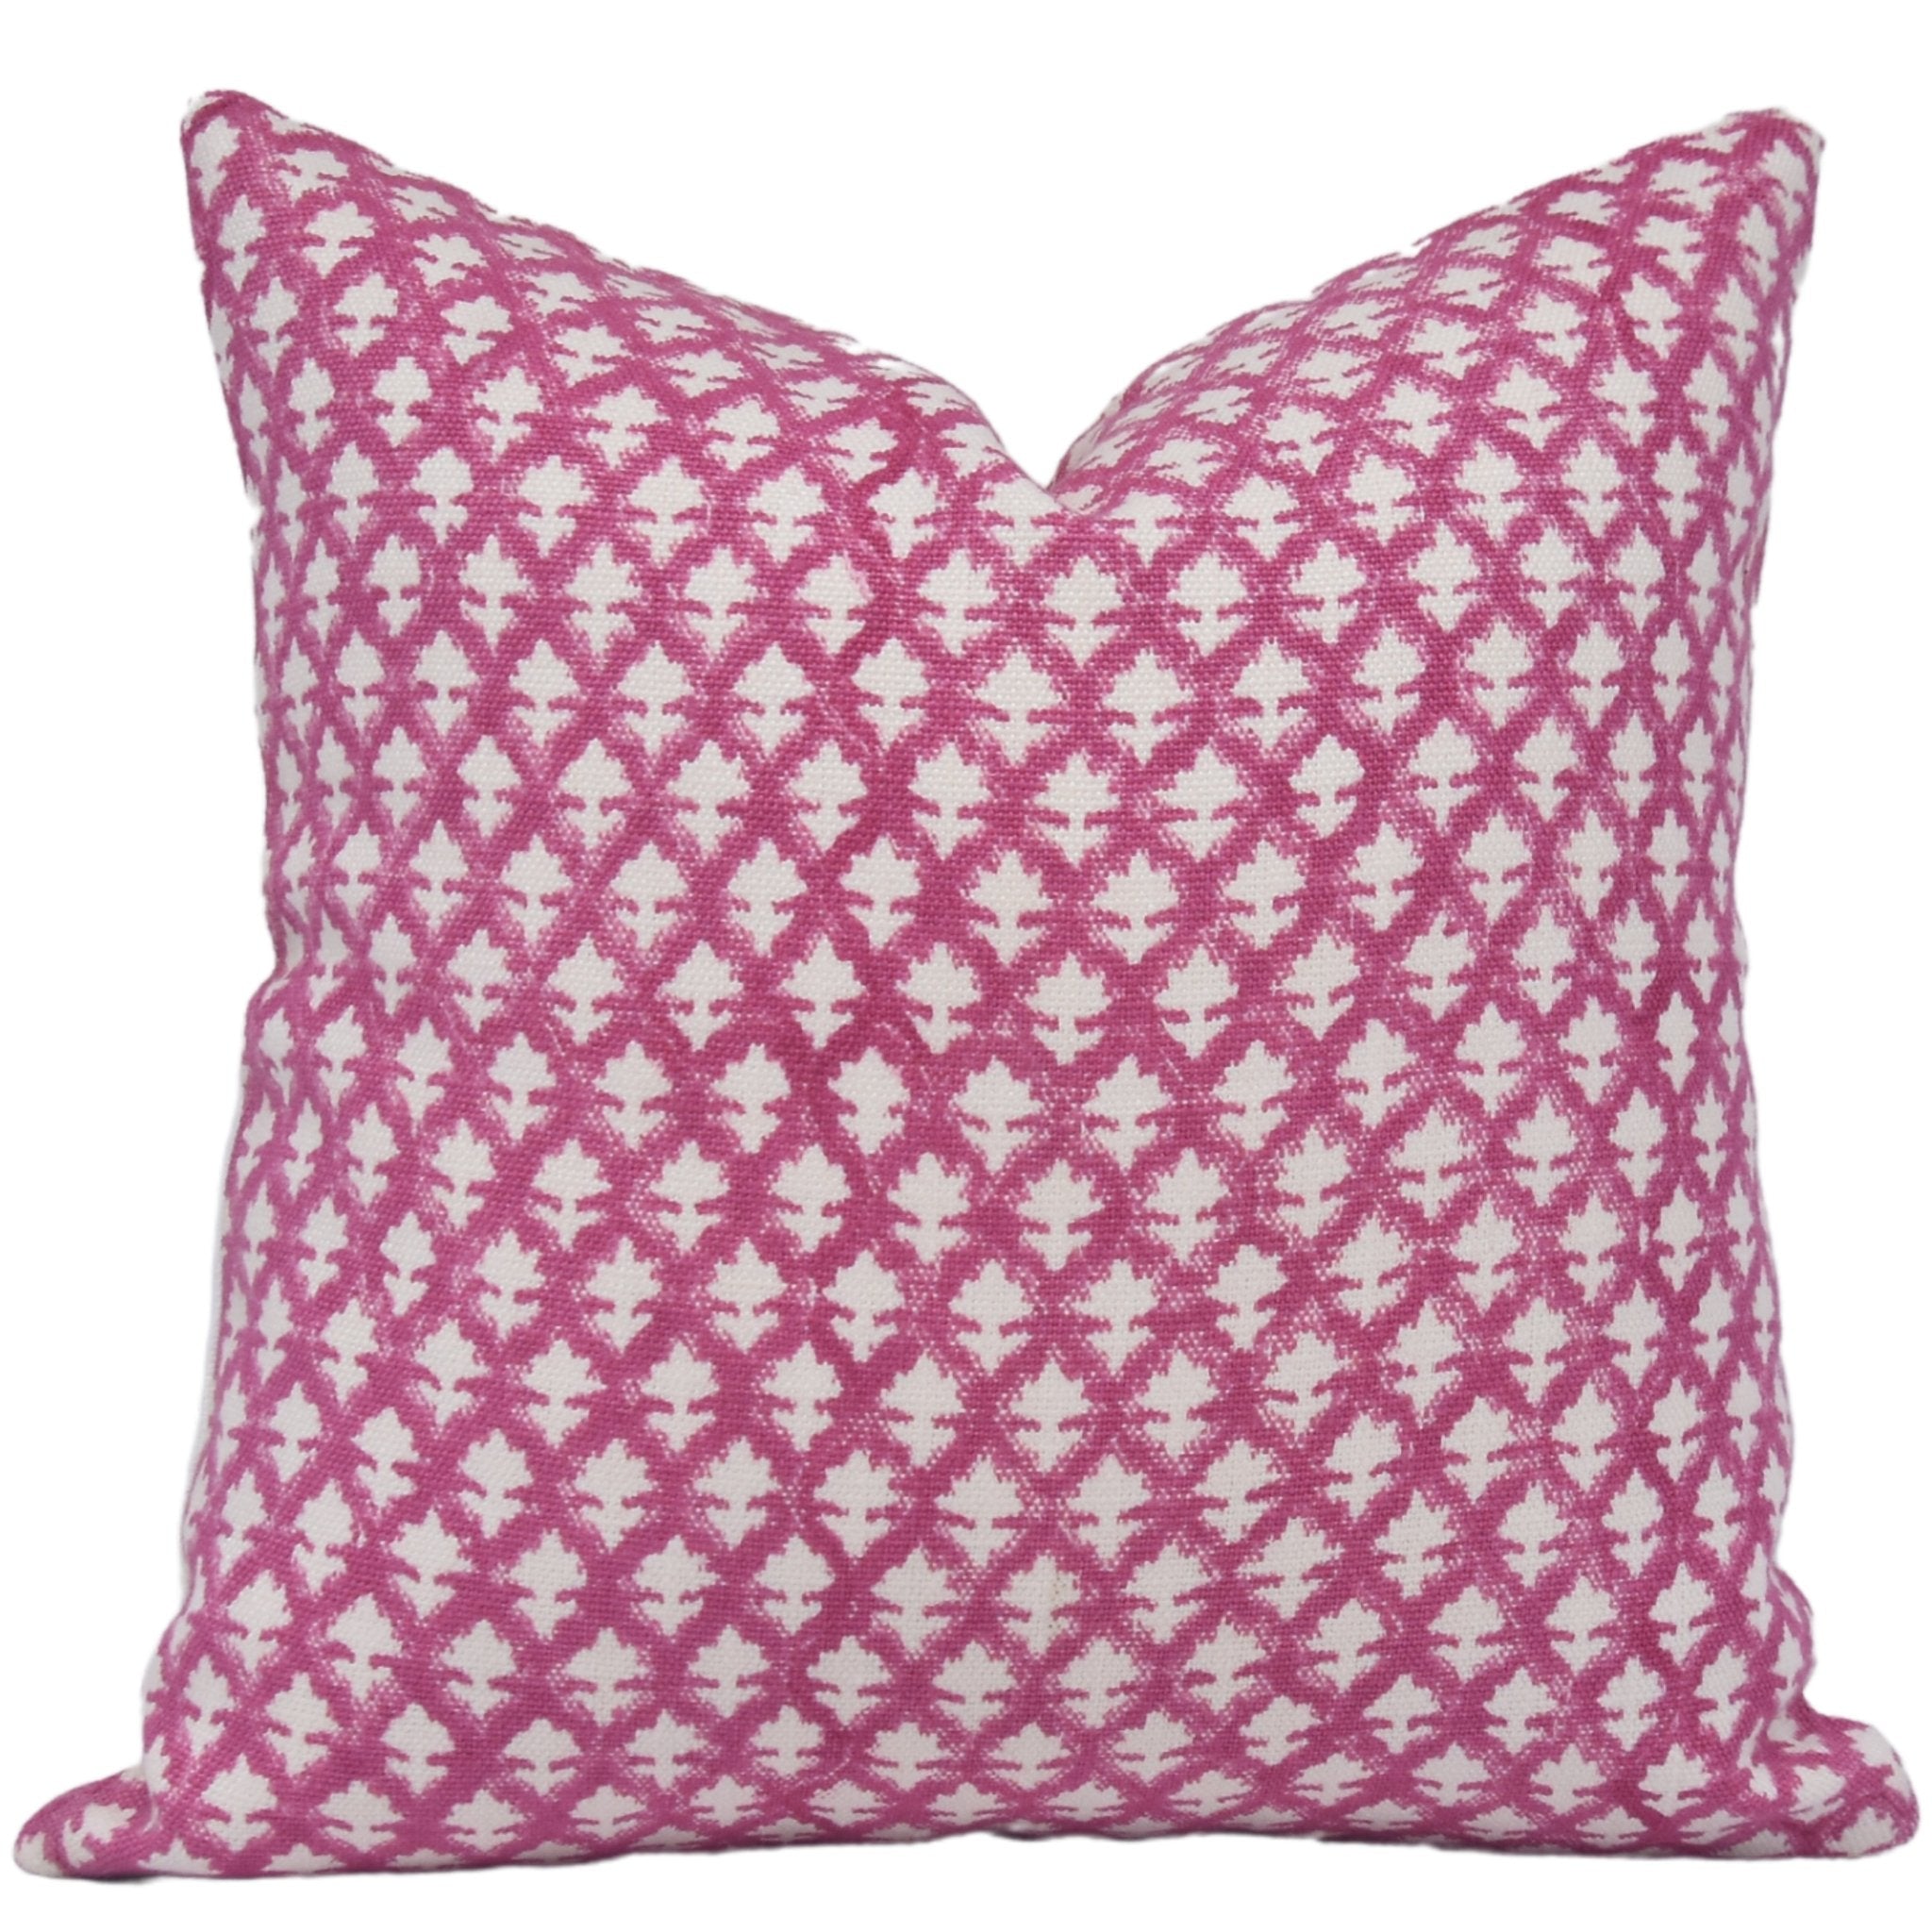 PINKCITY JAAL PILLOW COVER - FABDIVINE LLCPINKCITY JAAL PILLOW COVEROL Pillow CoverFABDIVINE LLC